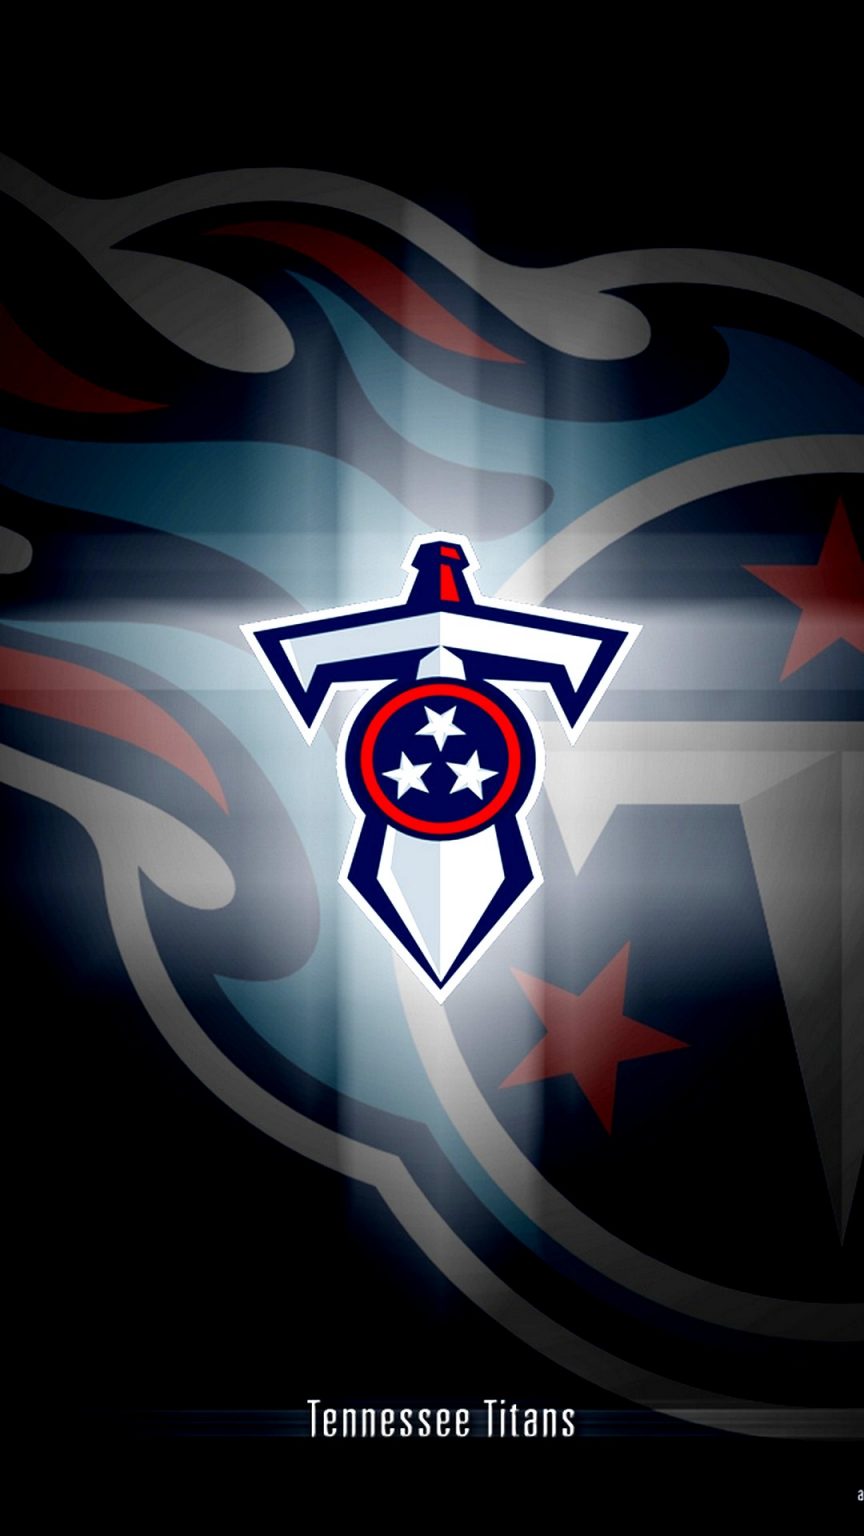 Tennessee Titans iPhone Wallpaper New - 2021 NFL iPhone Wallpaper